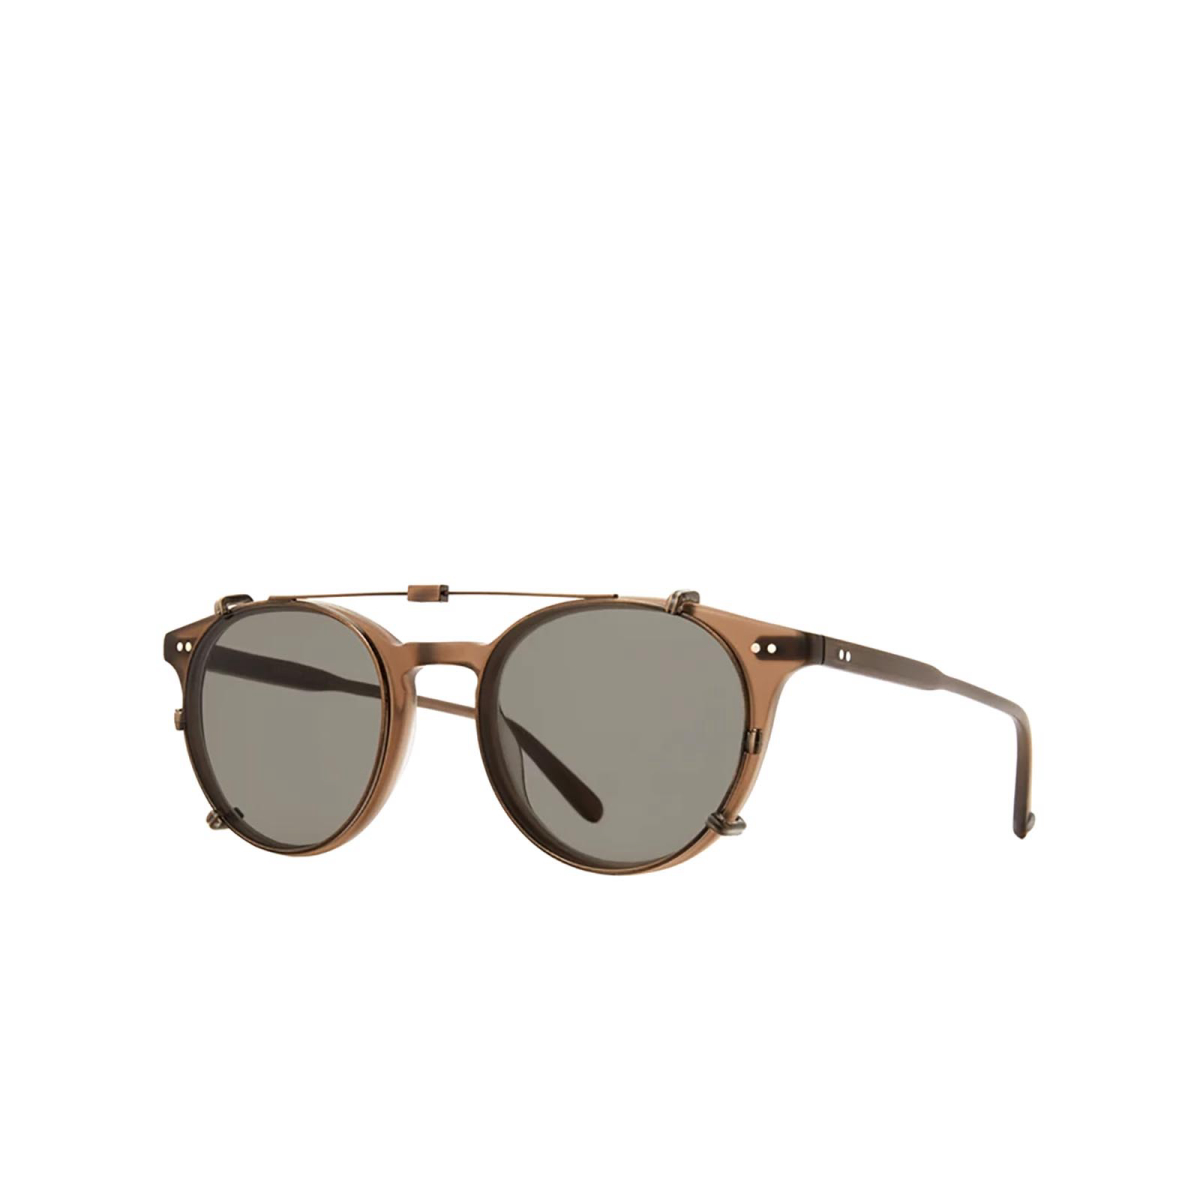 Garrett Leight® Accessories: Clune Clip color Brushed Gold BG/G15 - 2/2.